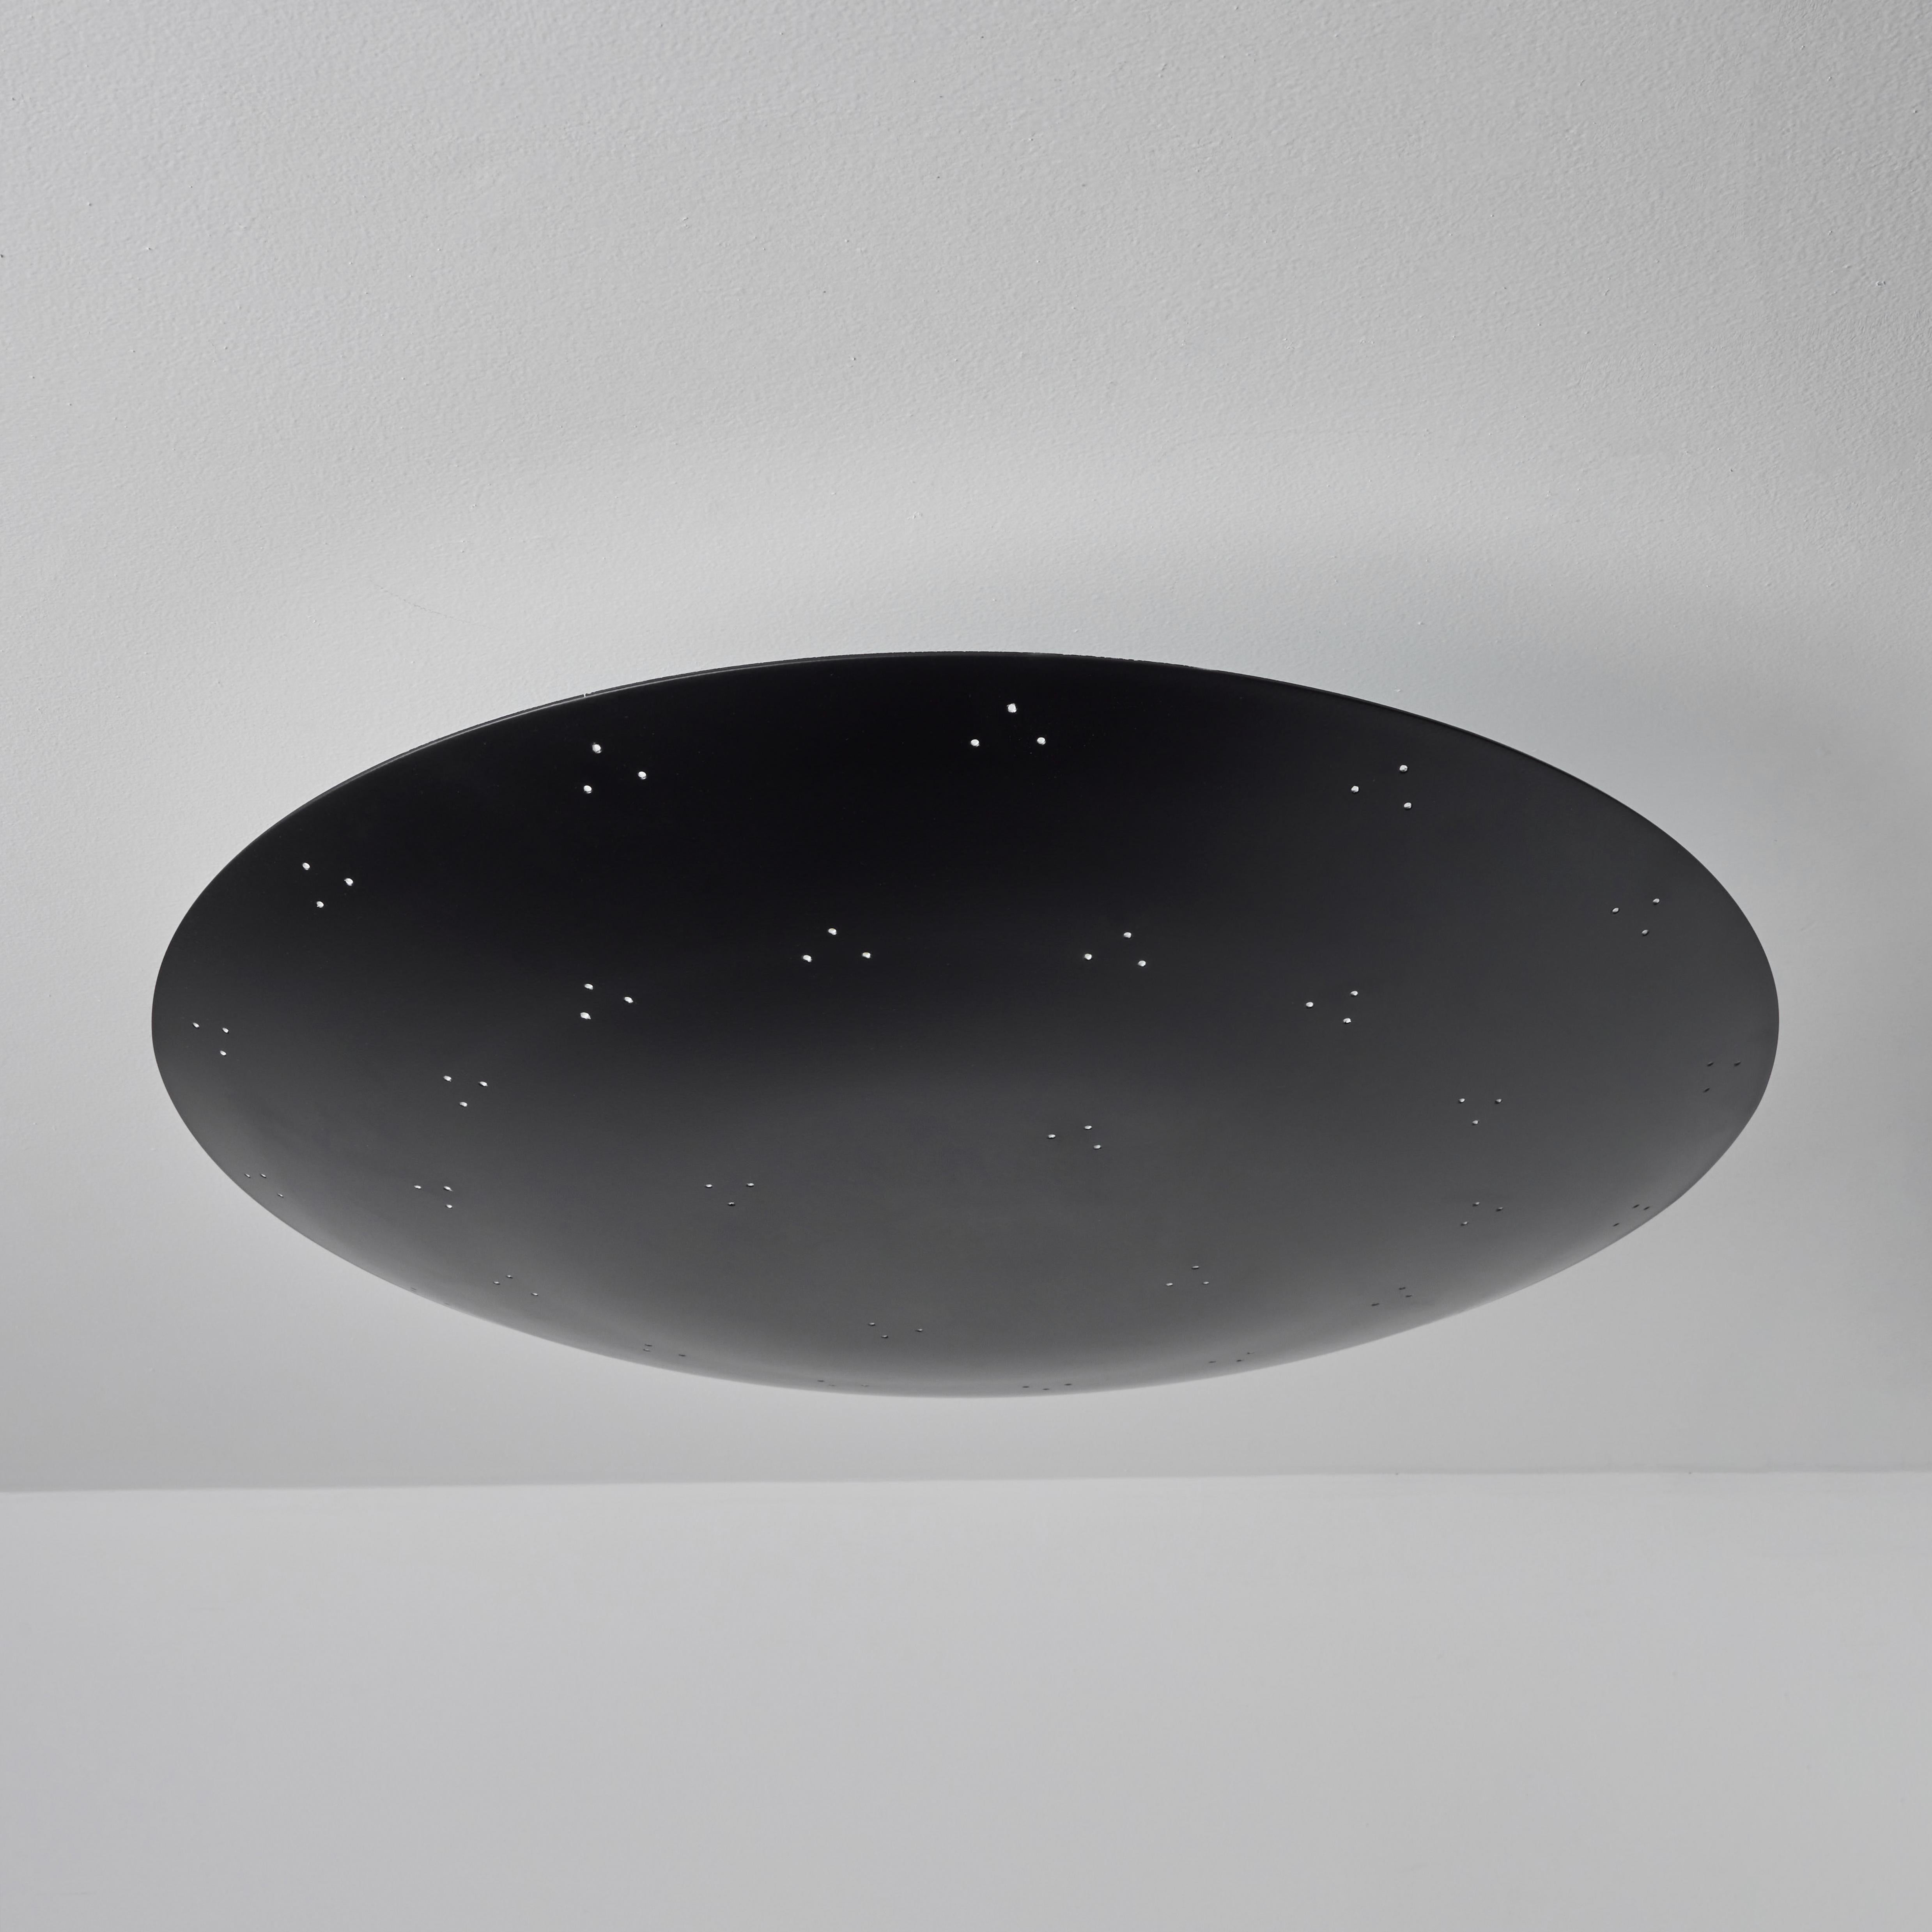 Large Two Enlighten 'Rey' perforated dome ceiling lamp in black. Hand-fabricated in Los Angeles, these highly refined ceiling lamps are reminiscent of the iconic mid-century Finnish designs of Paavo Tynell and Lisa Johansson Pape. Executed in black